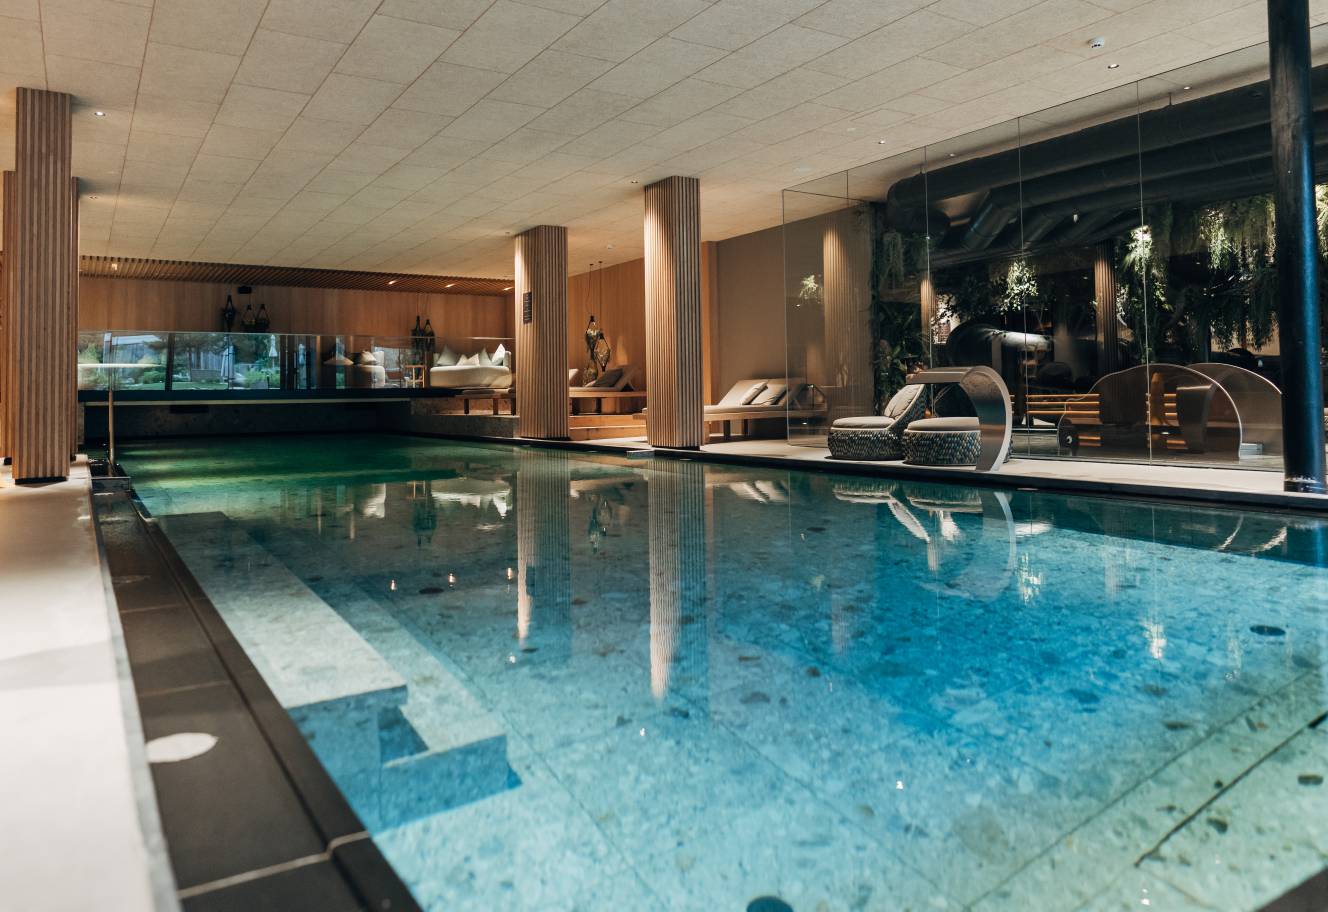 Indoorpool for families at the Forsthofgut